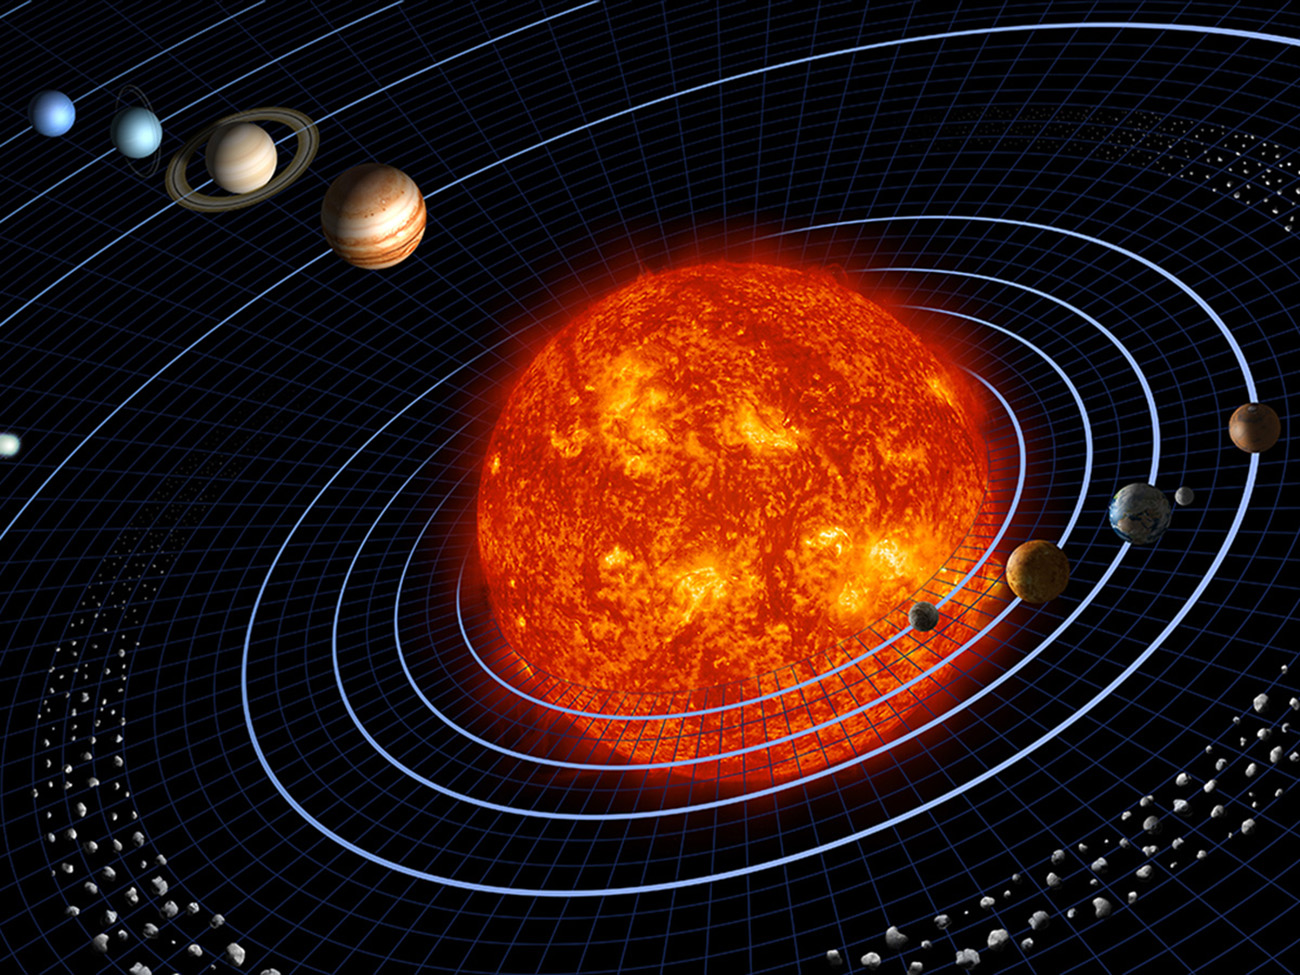 Free Lesson: Composition and Structure of the Solar System 3.3.6